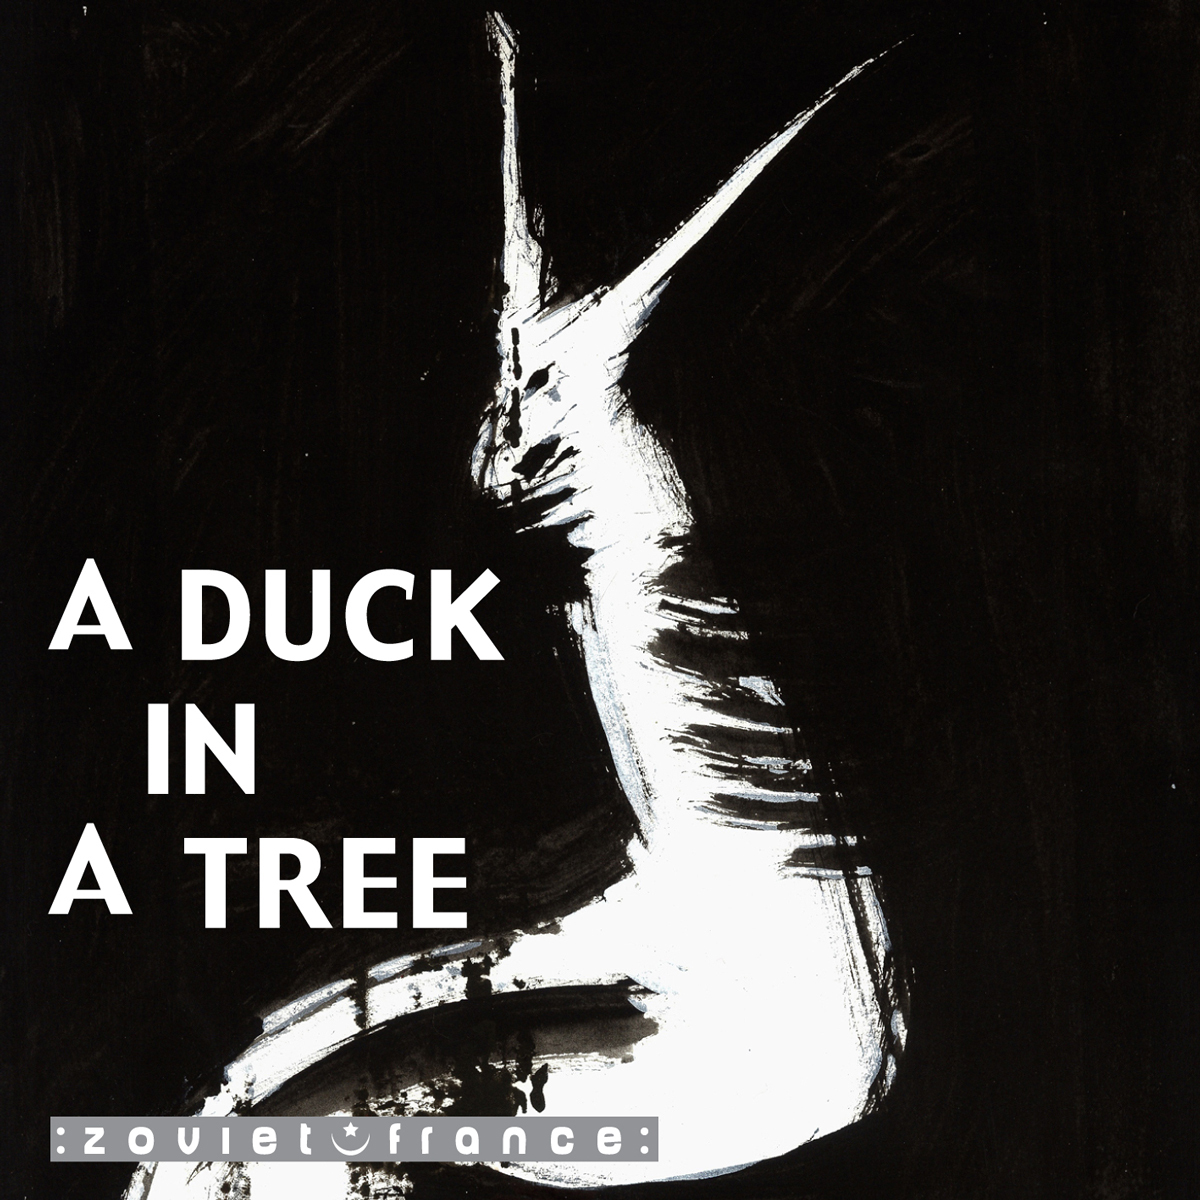 A-Duck-in-a-Tree-2012-09-01-_-A-Trip-of-Hares-layout-1200.jpg